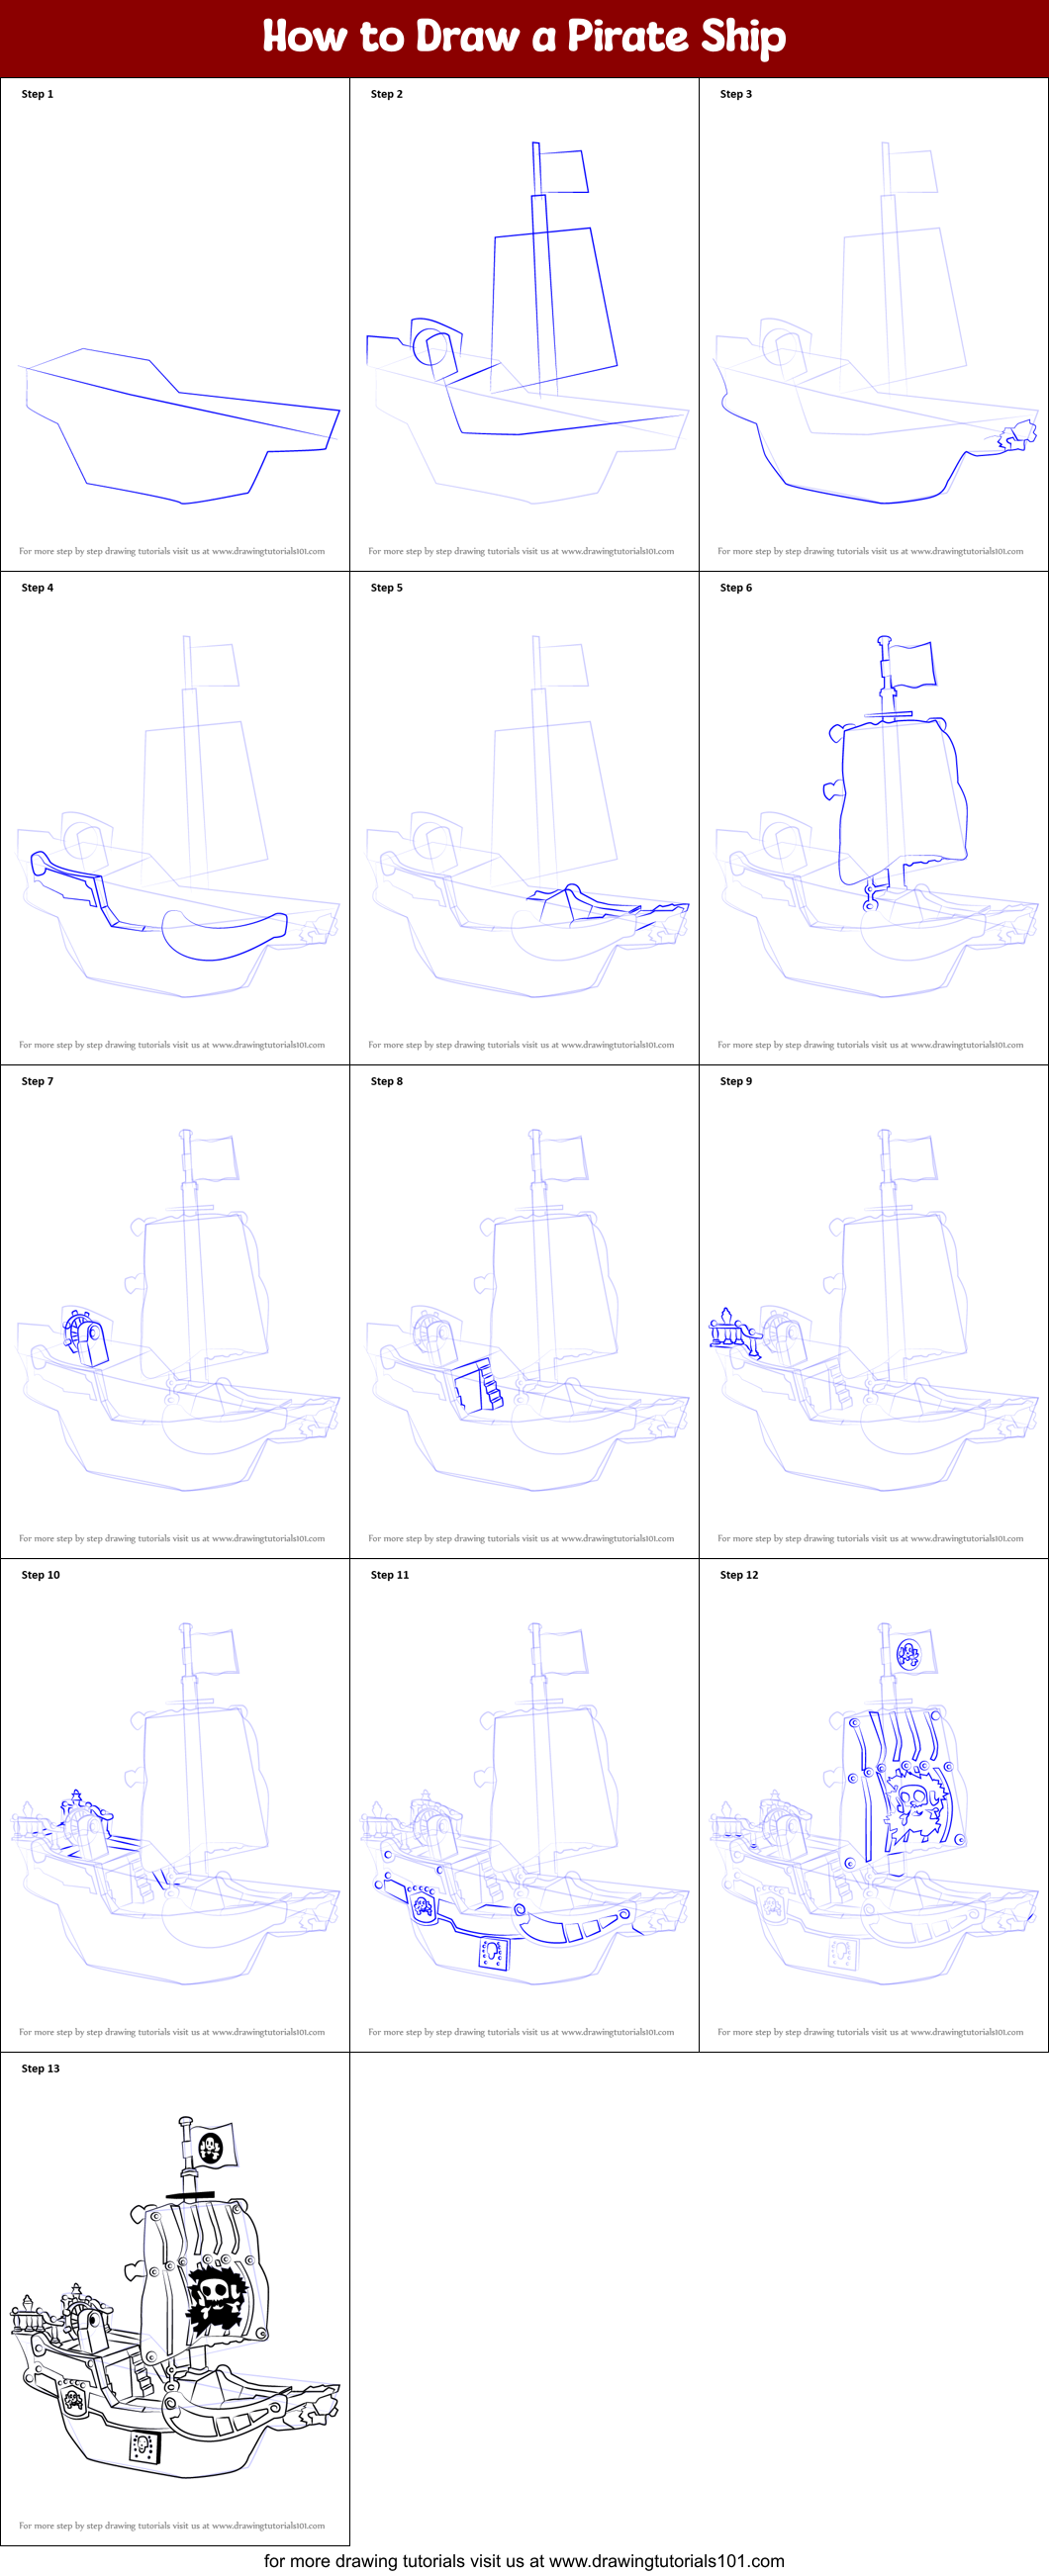 How to Draw a Pirate Ship printable step by step drawing sheet